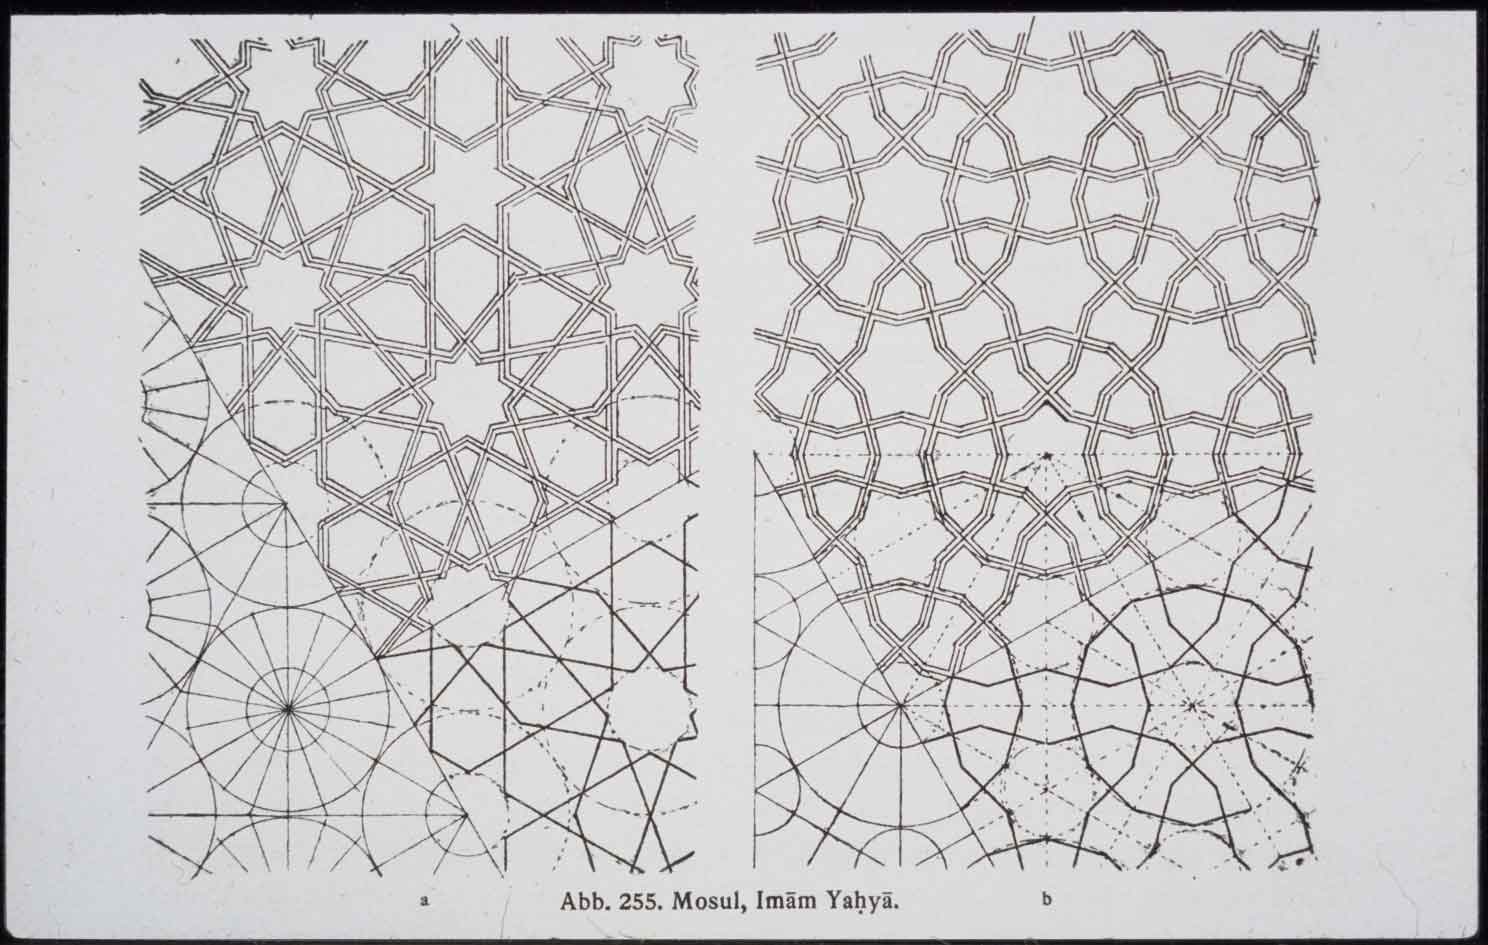 Drawing of geometric patterns found on carved architectural decoration in the shrine, by Ernst Herzfeld.